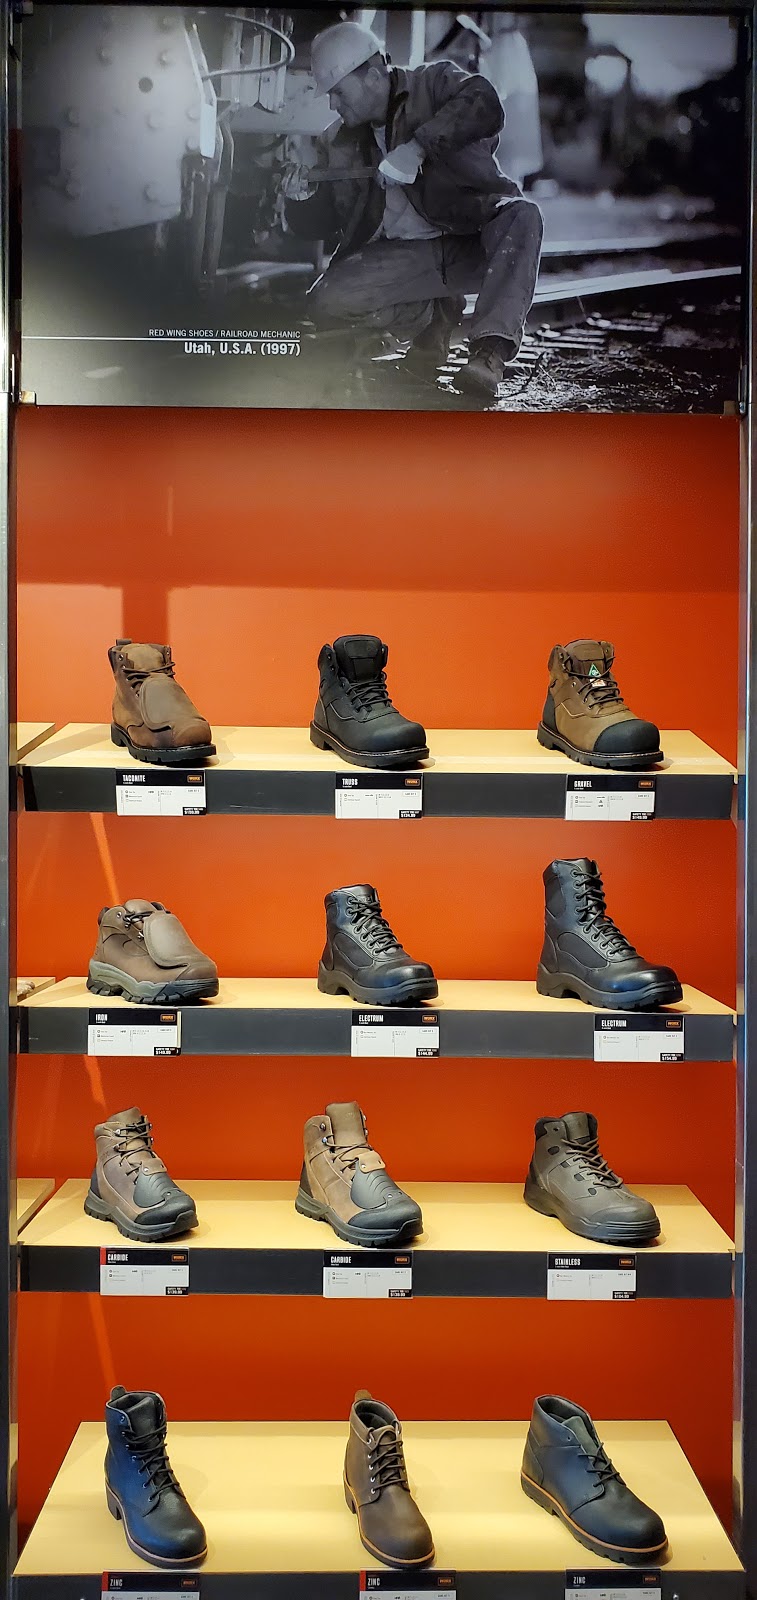 Red Wing Shoes | 14155 W Bell Rd #105, Surprise, AZ 85374 | Phone: (623) 215-7435